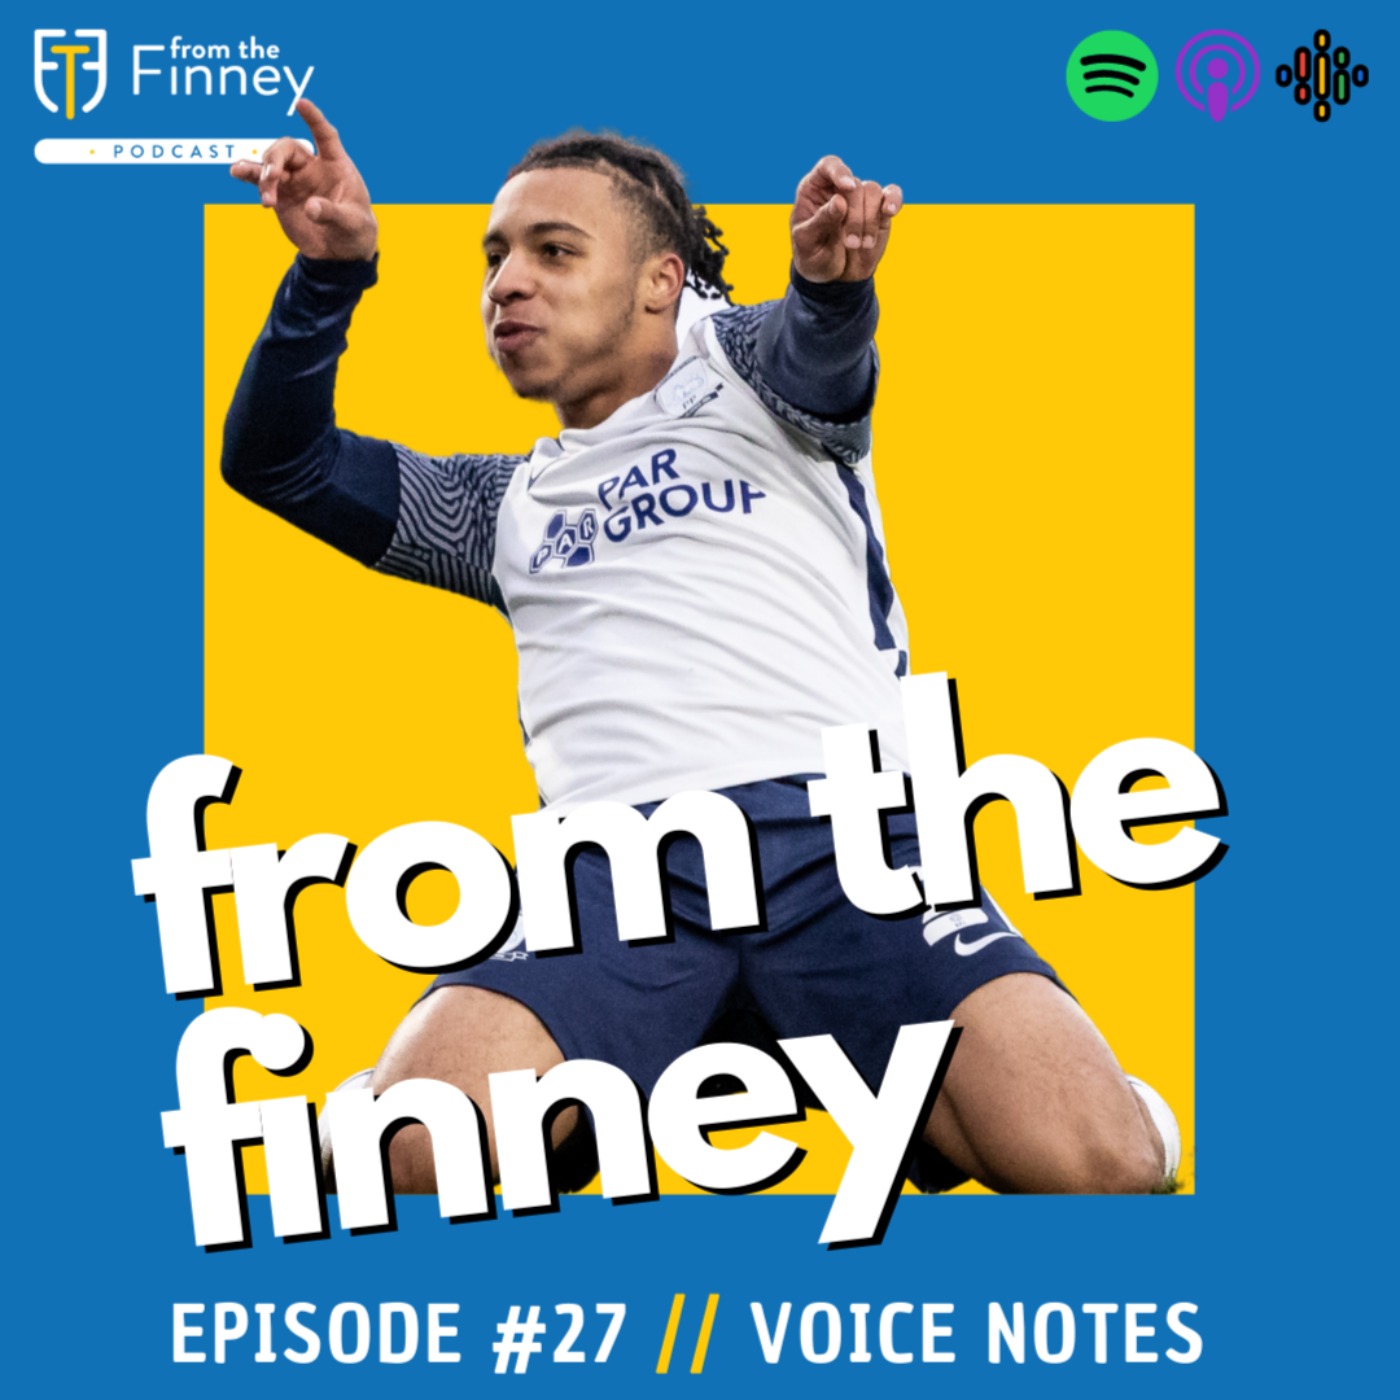 Episode #27 // Voice Notes // From the Finney Podcast